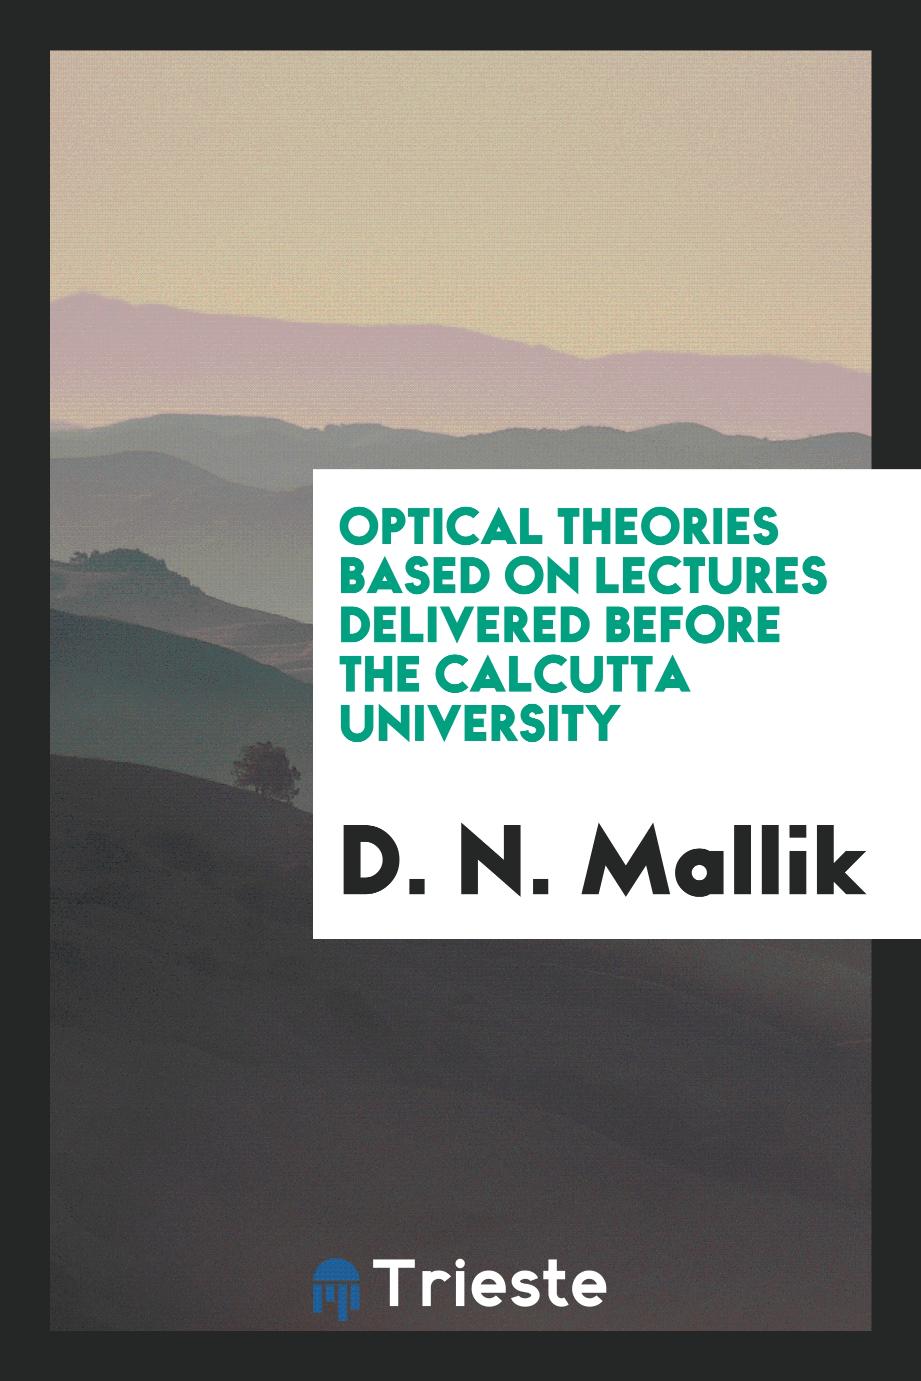 Optical theories based on lectures delivered before the Calcutta University